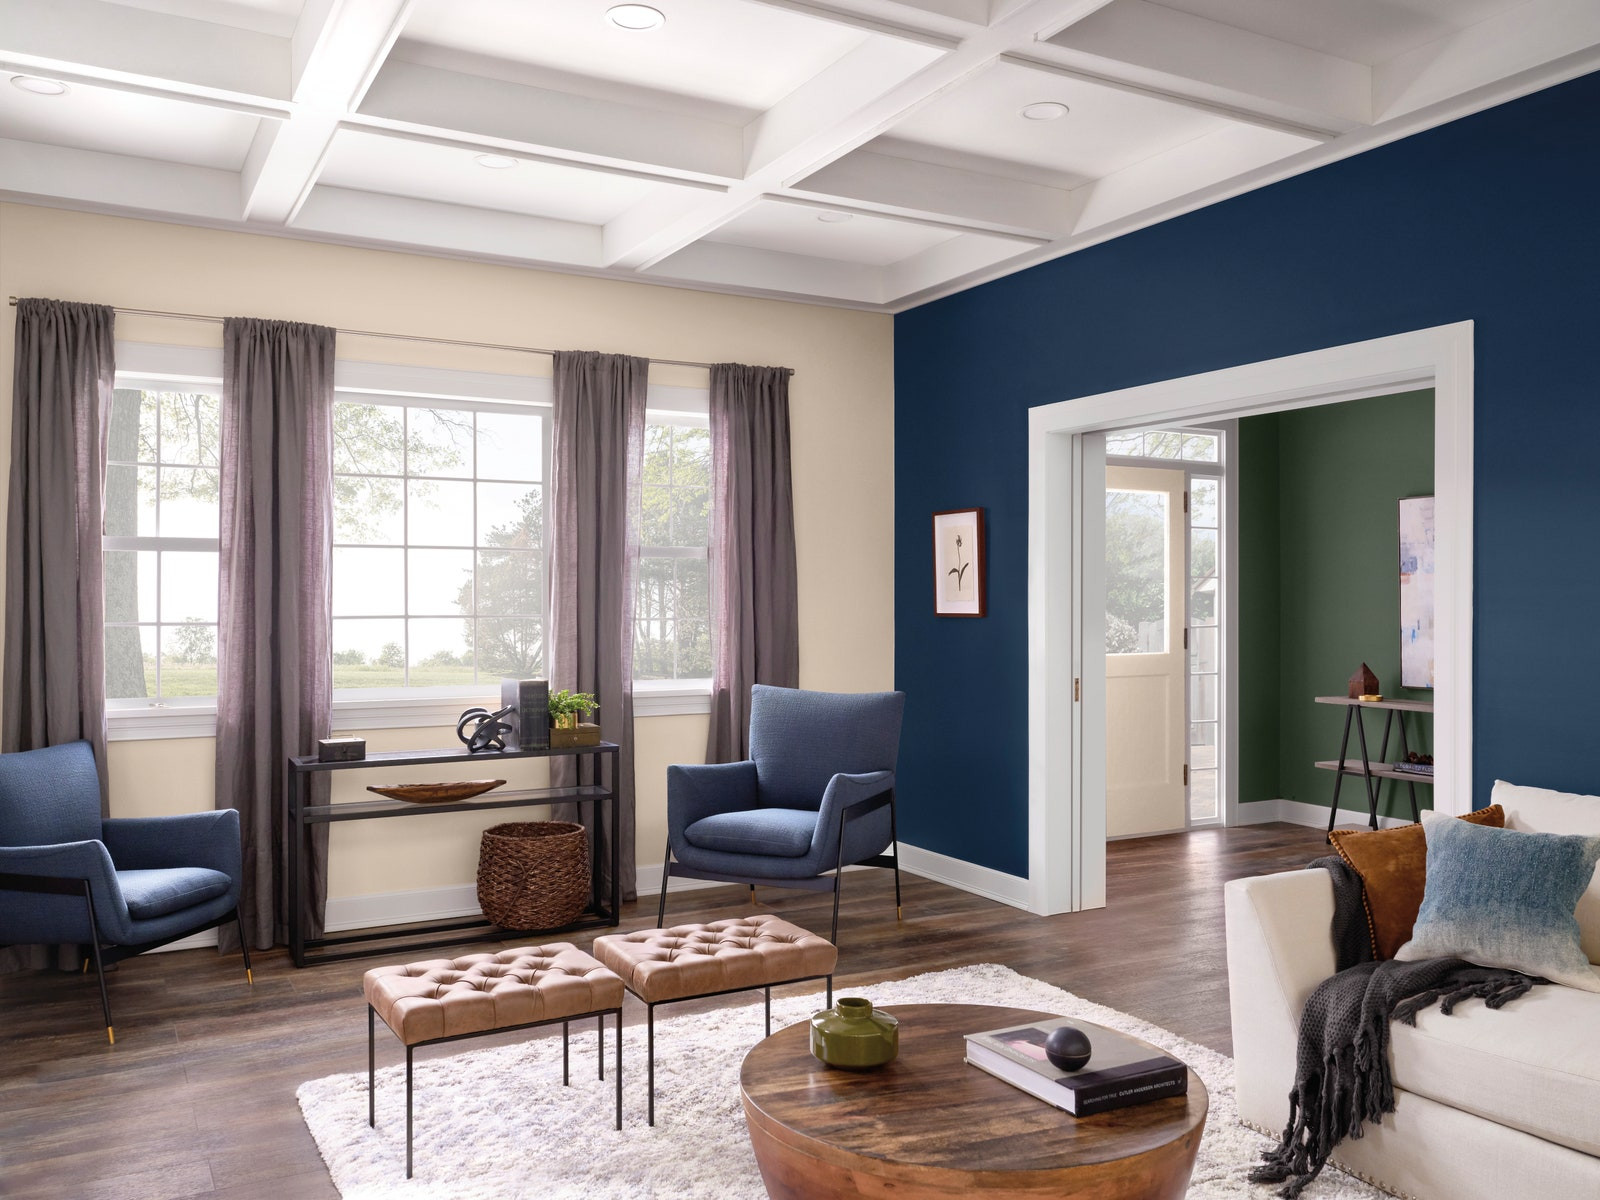 Living Room Color Ideas 2020
 The Color Trends We’ll Be Seeing in 2020 According to